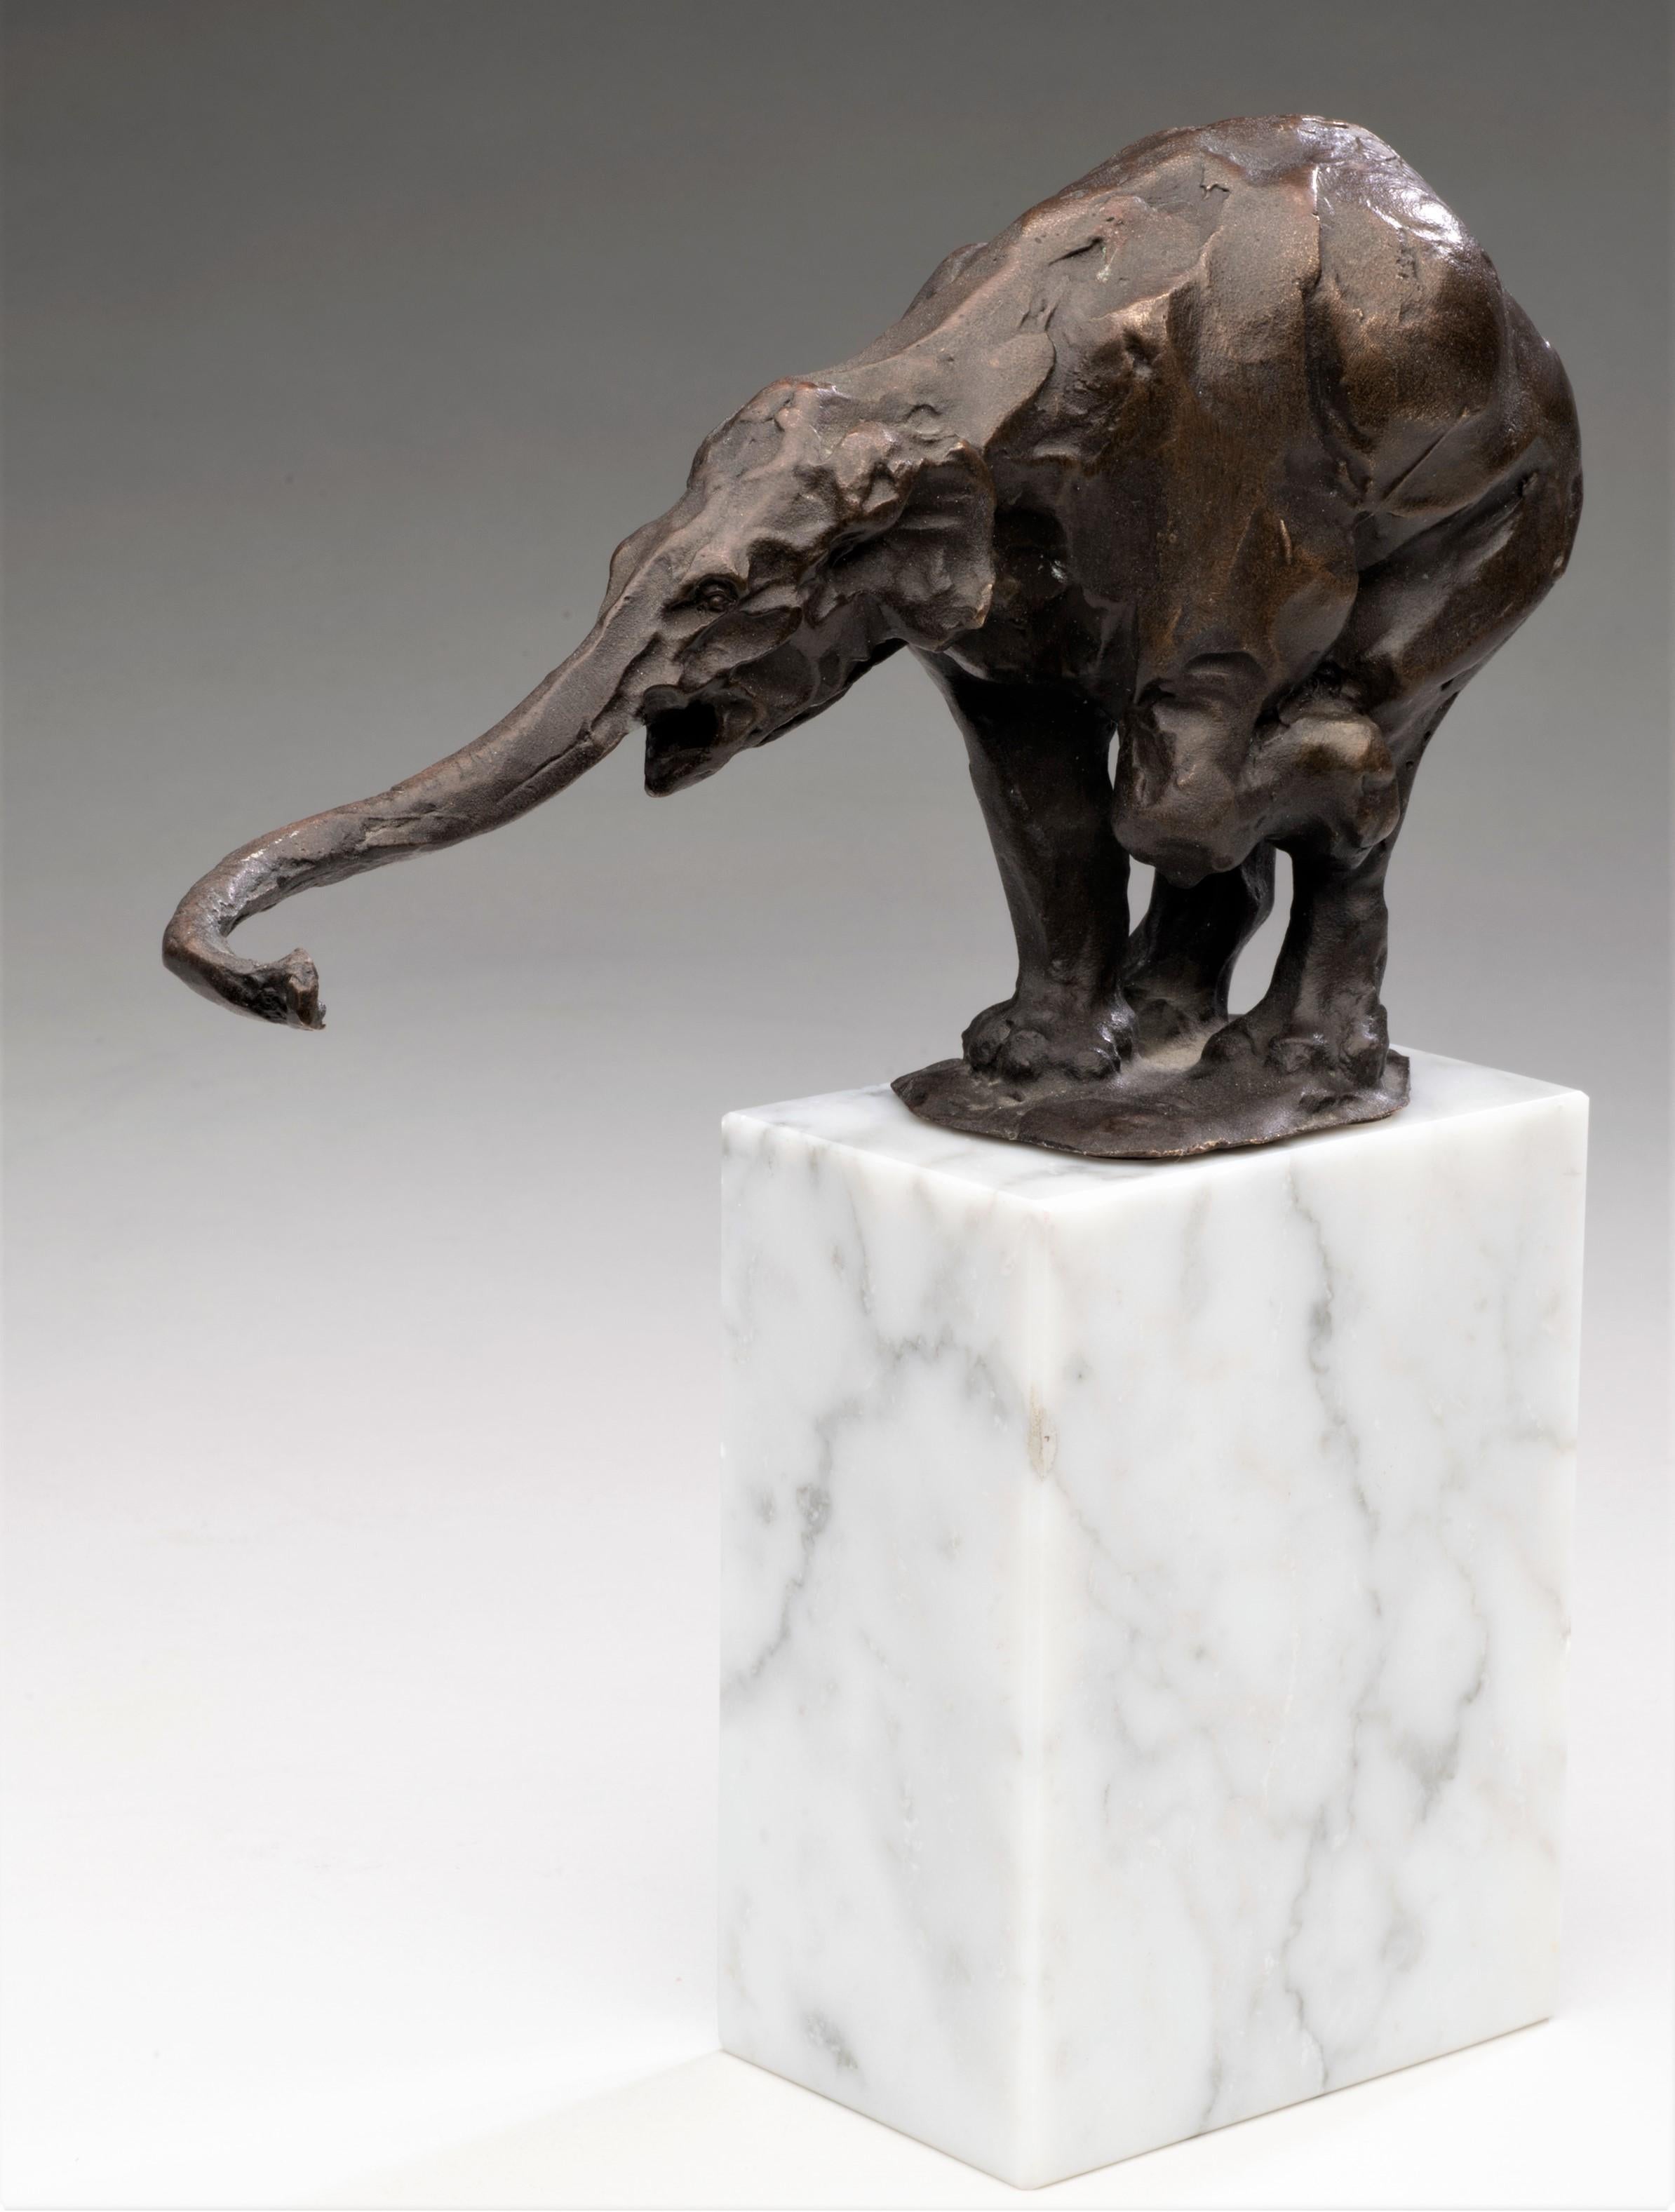 Balancing Elephant
Louis-Albert Carvin (France, 1875-1951)
Bronze, marble 
Circa 1930s, Art Deco
8 x 7.5 x 2 (4 1/4 x 7 1/2 x 1 7/8 figure) inches 

Artist Louis-Albert Carvin, born in Paris in 1875, was exposed to art from an early age through his